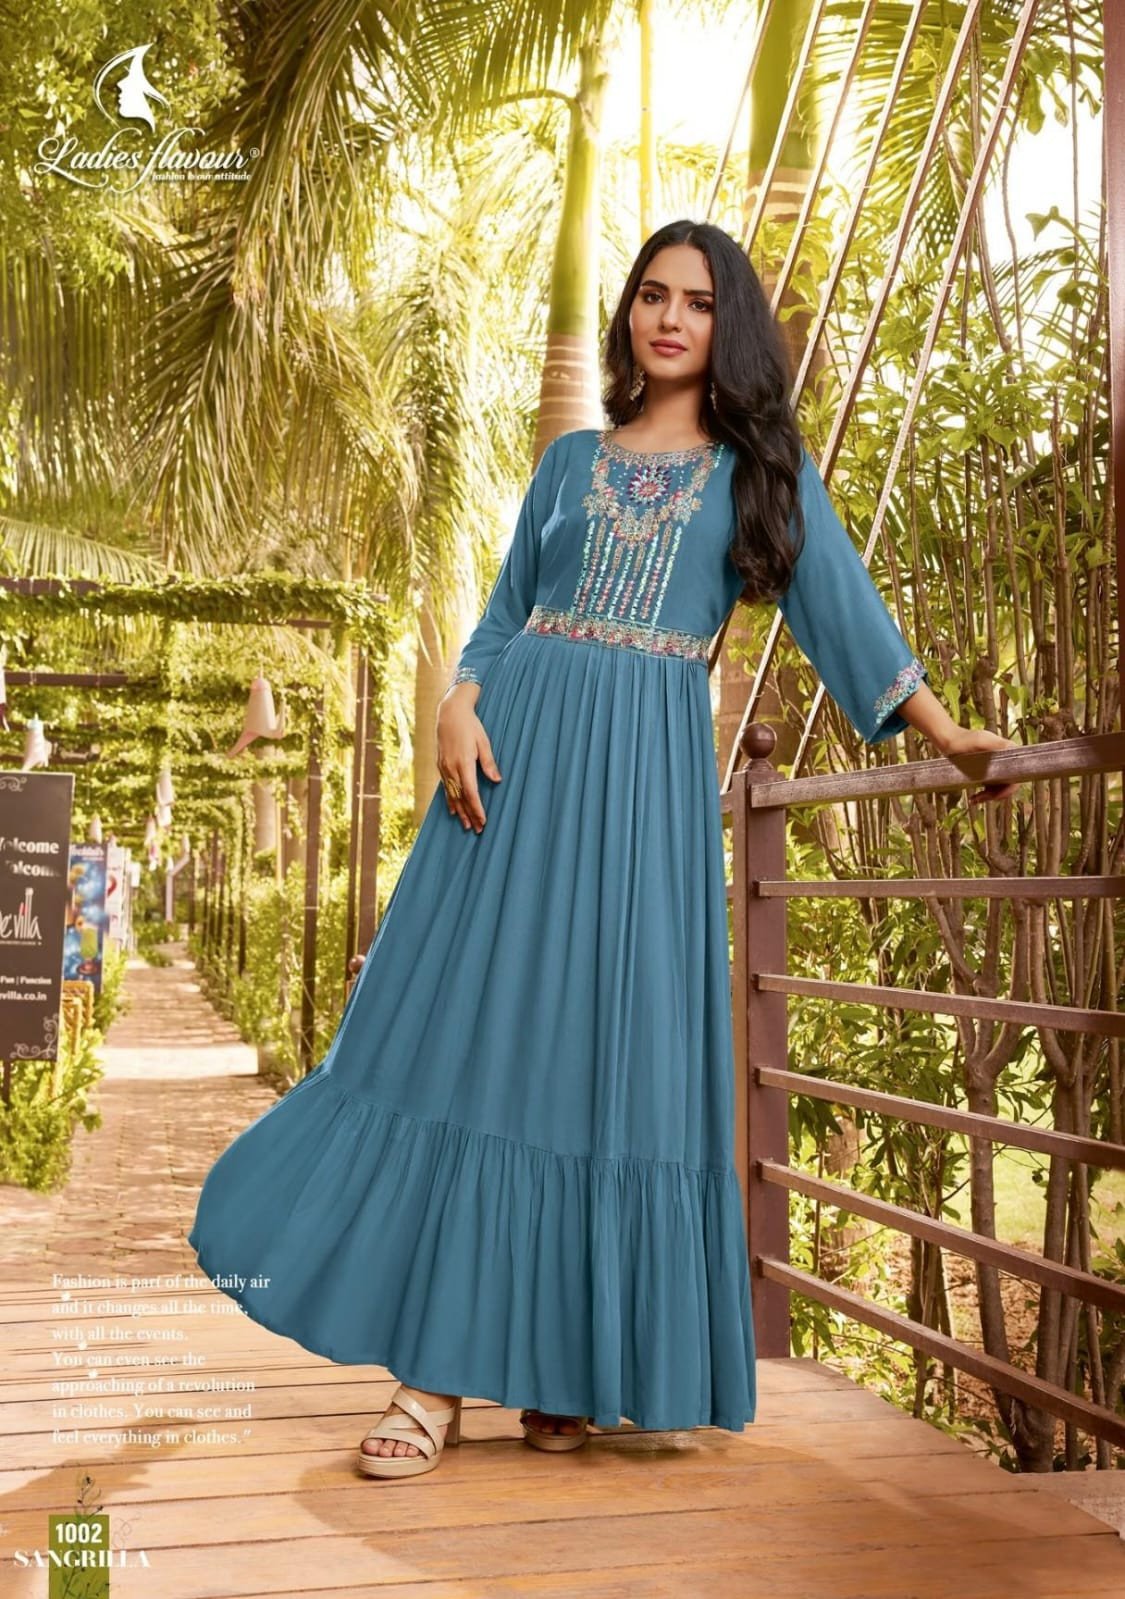 Share 205+ low cost kurtis online latest